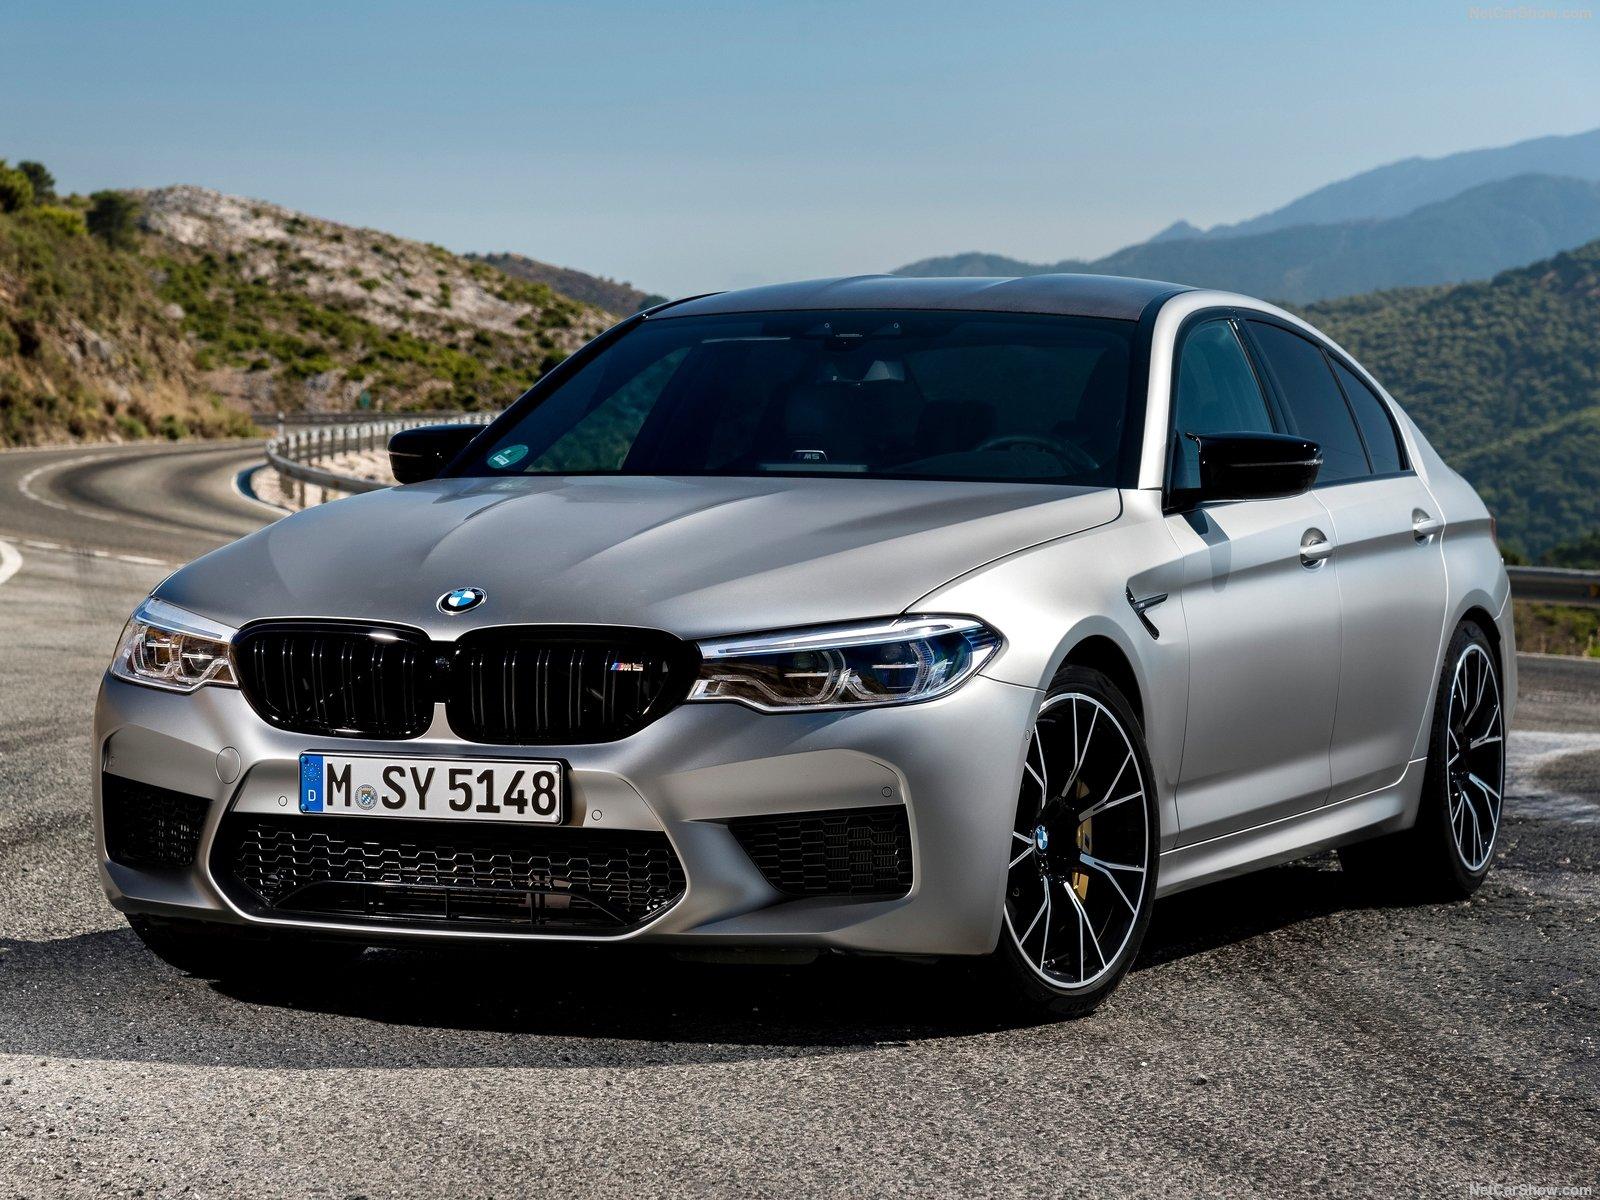 BMW M5 F90 picture. BMW photo gallery